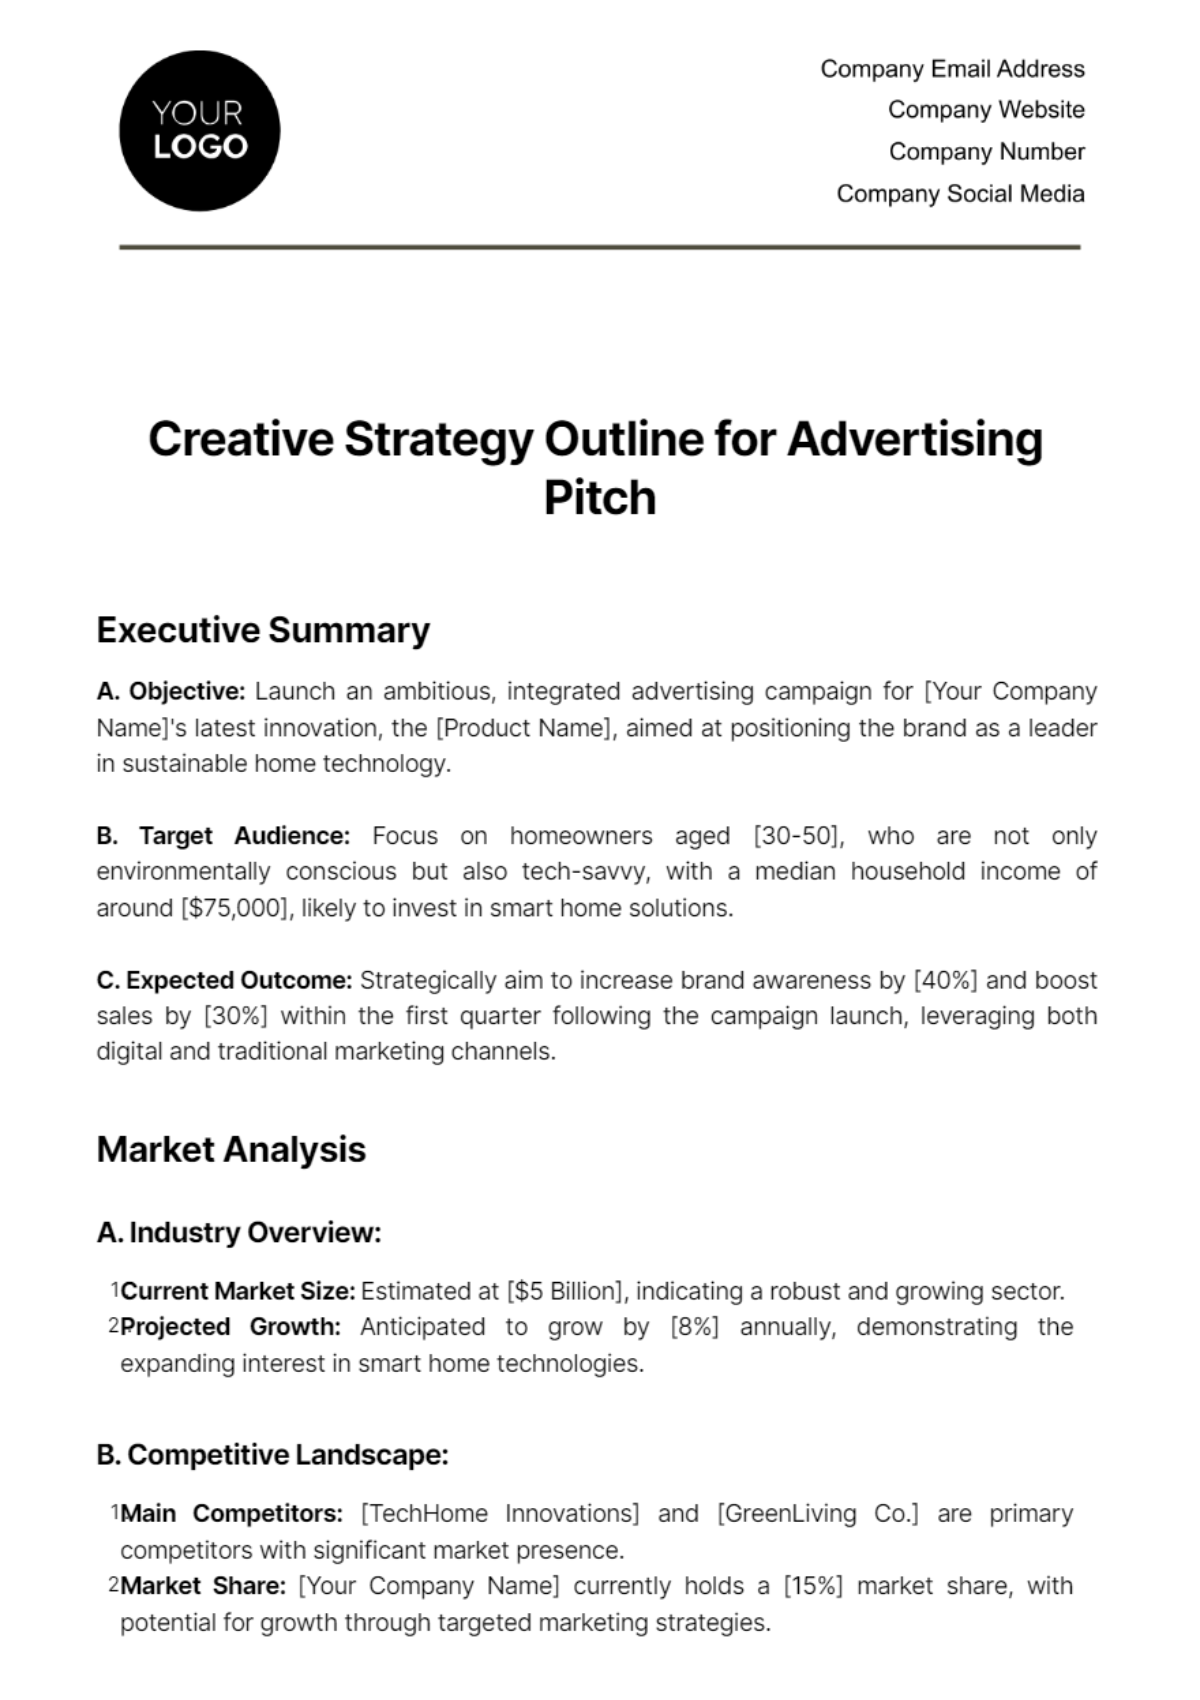 Creative Strategy Outline for Advertising Pitch Template Edit Online